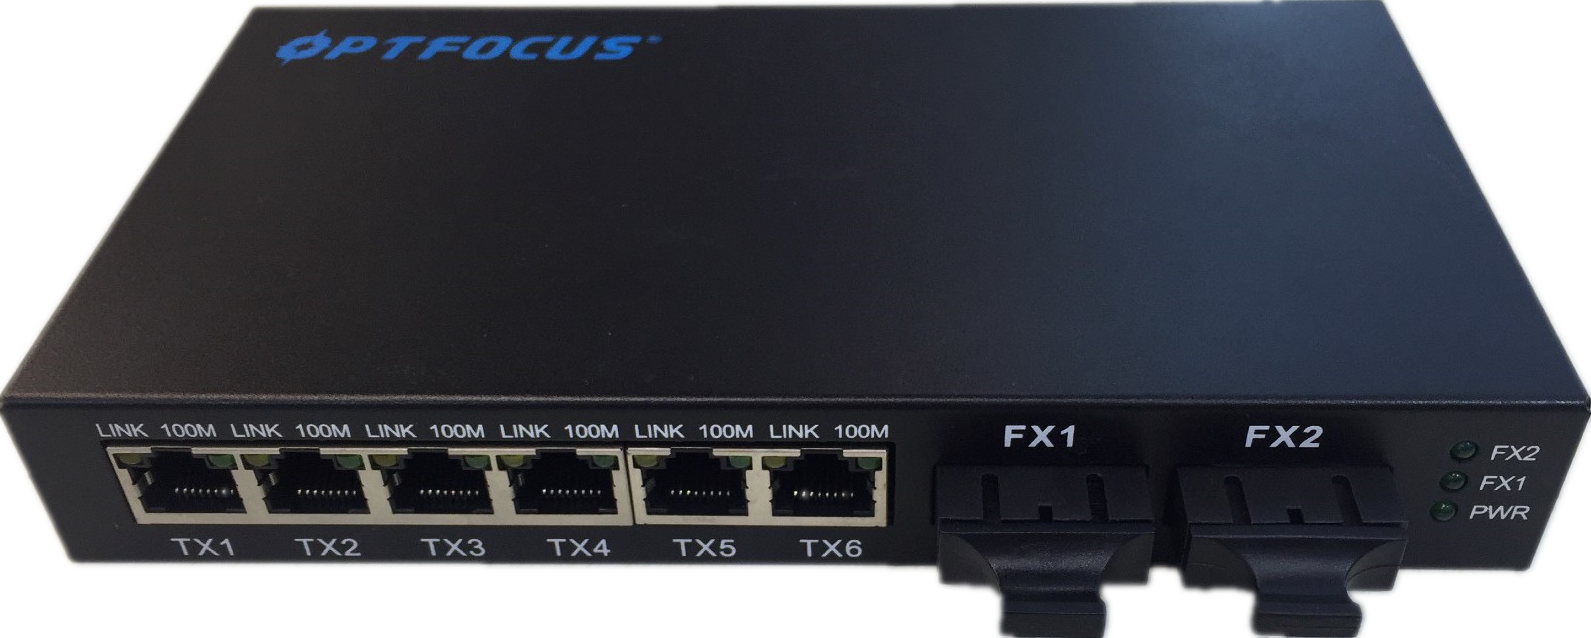 fast ethernet switch.png